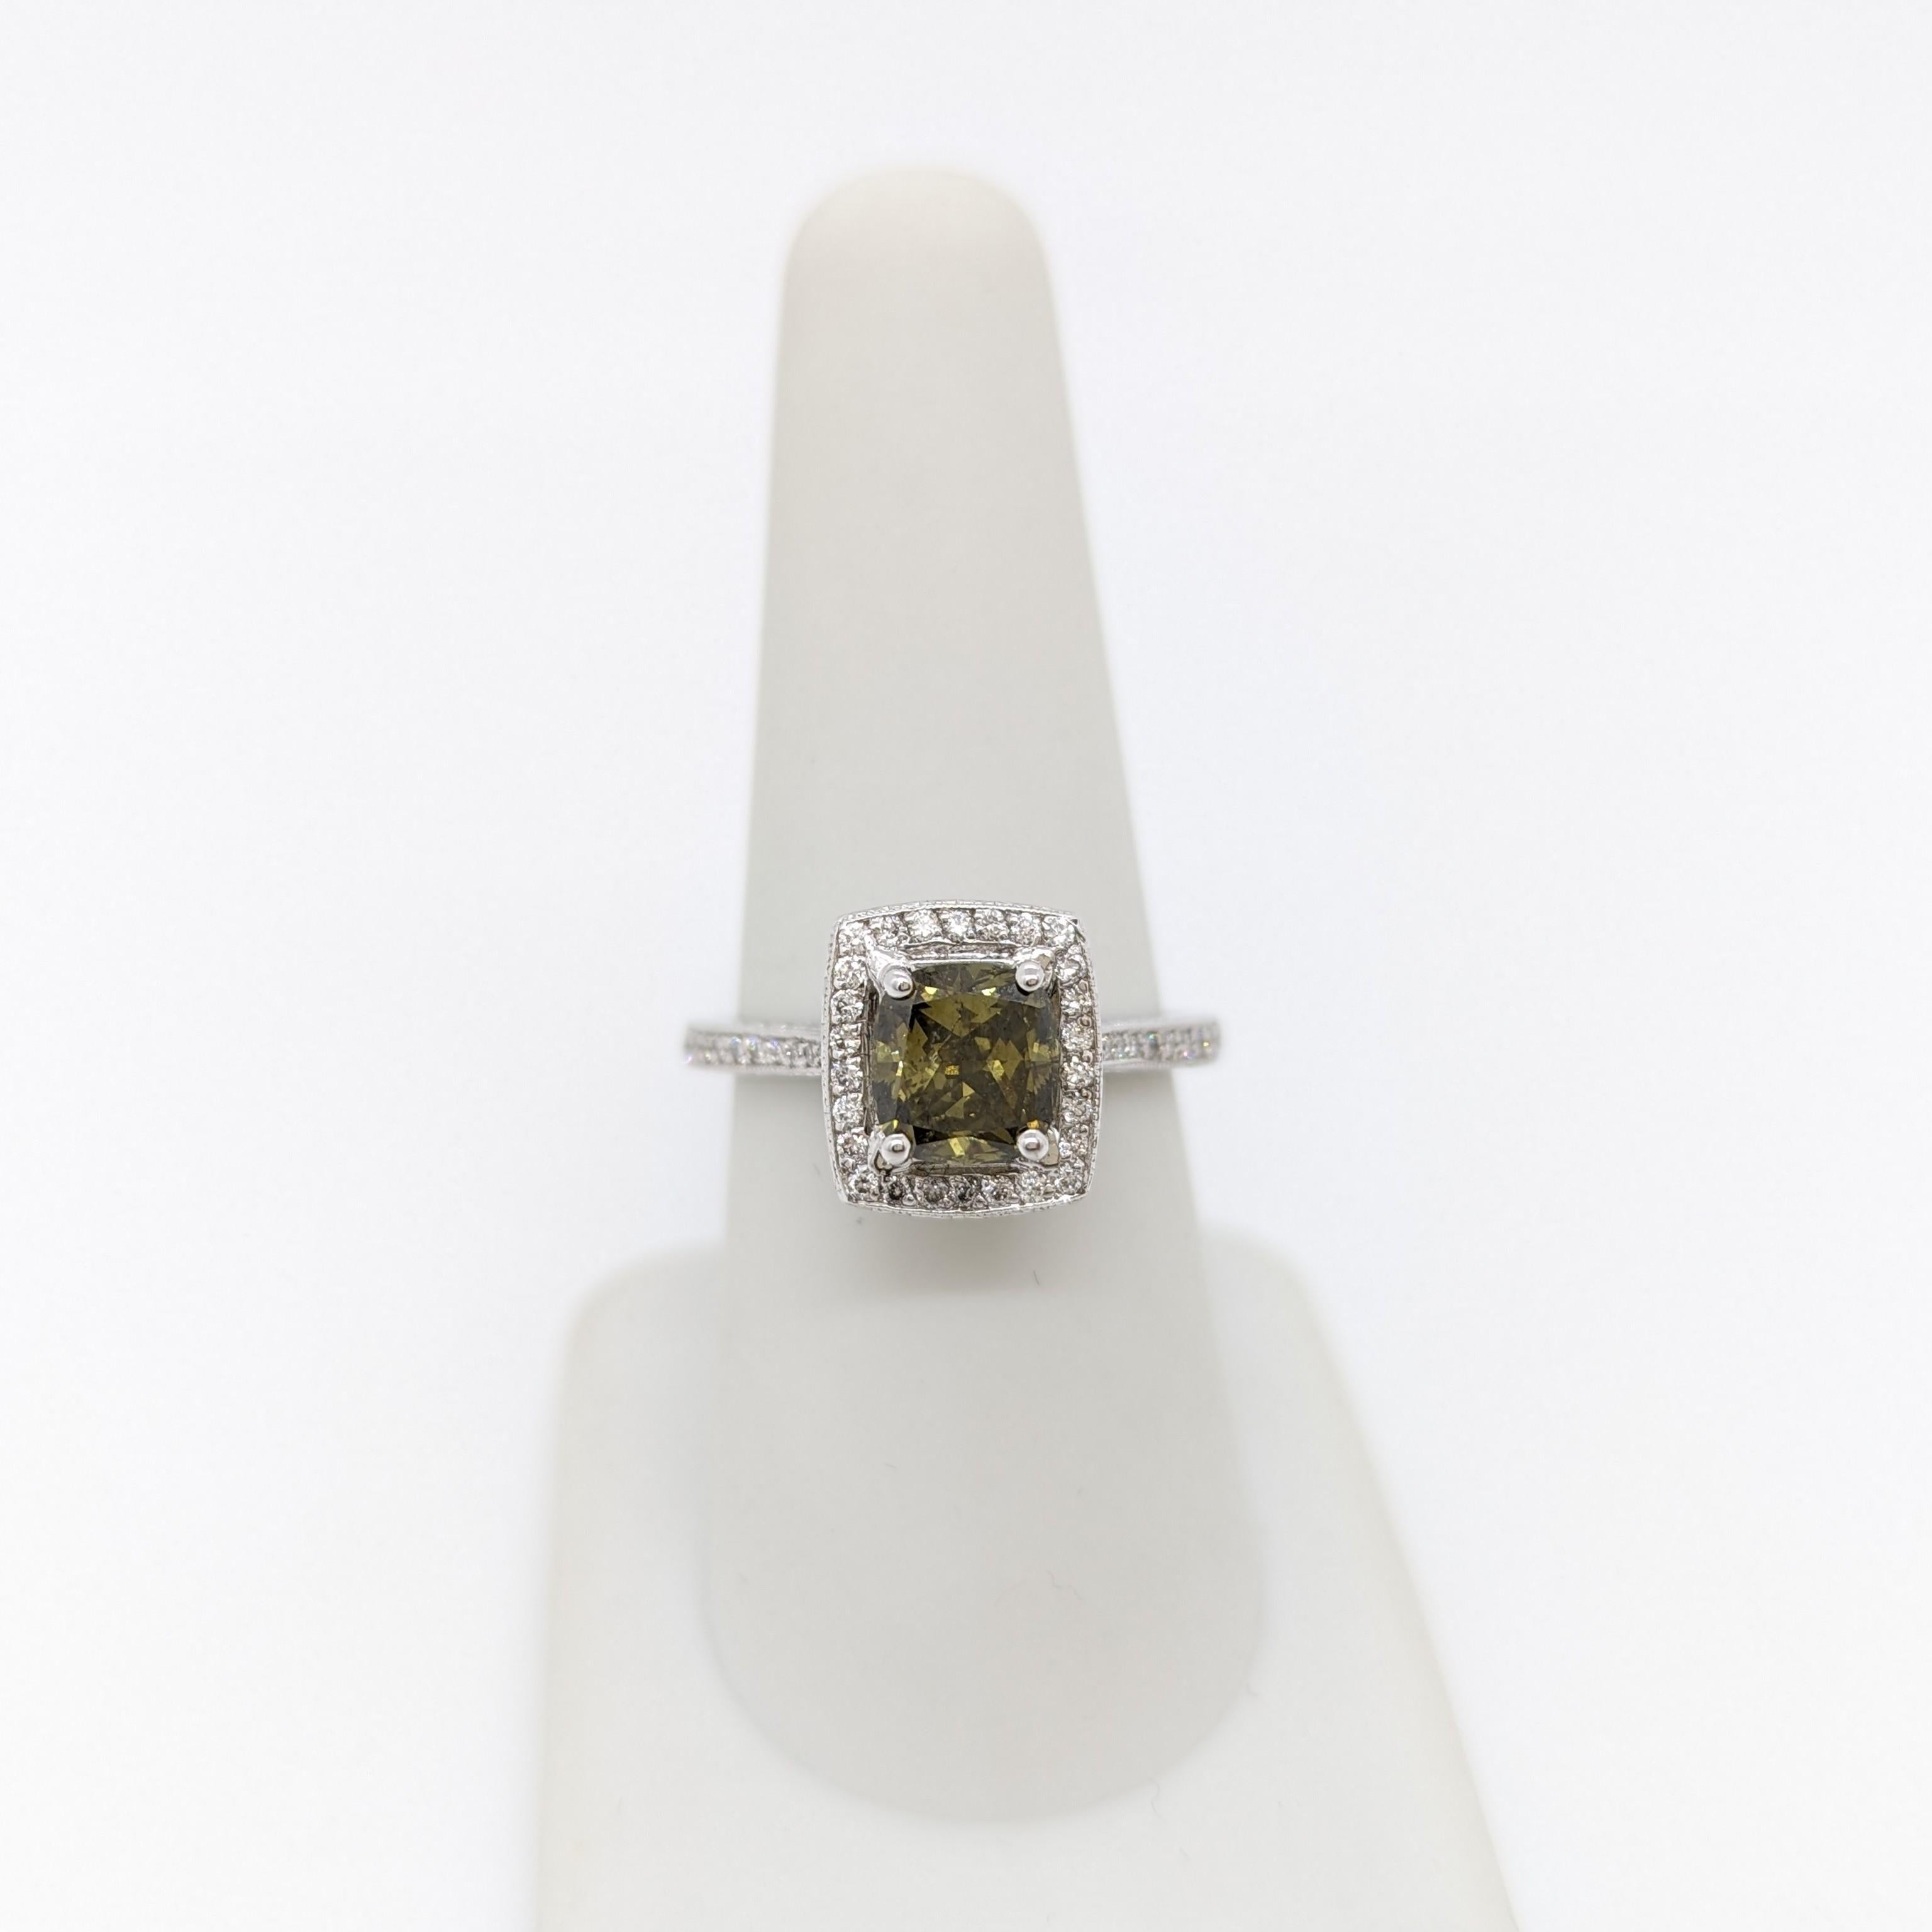 GIA Fancy Dark Brown Greenish Yellow Chameleon Diamond Ring in 14k In New Condition For Sale In Los Angeles, CA